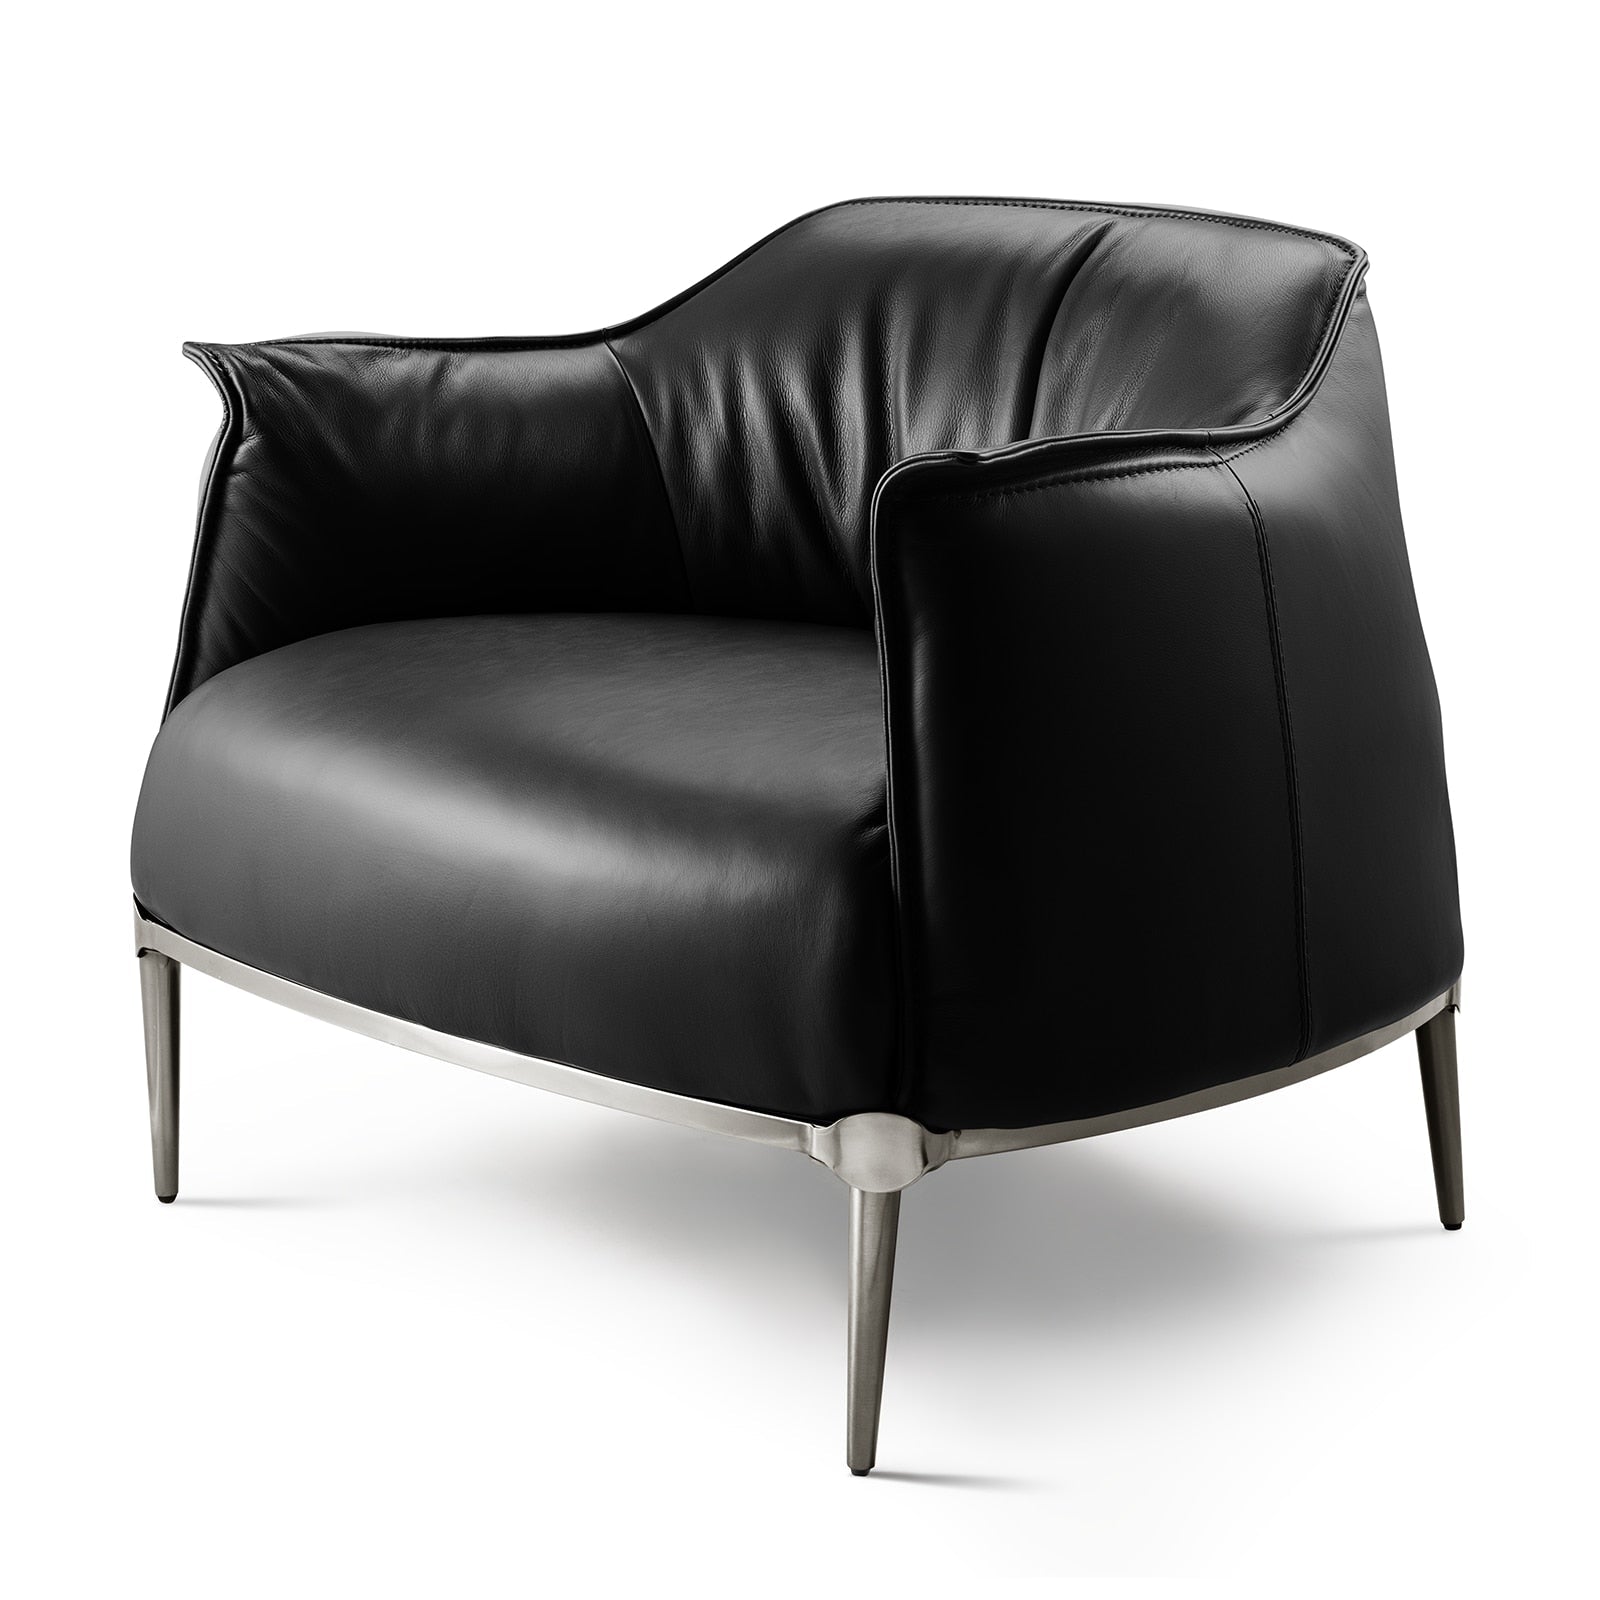 CORX Designs - Archibald Armchair by Jean-Marie Massaud with Genuine Italian Leather - Review